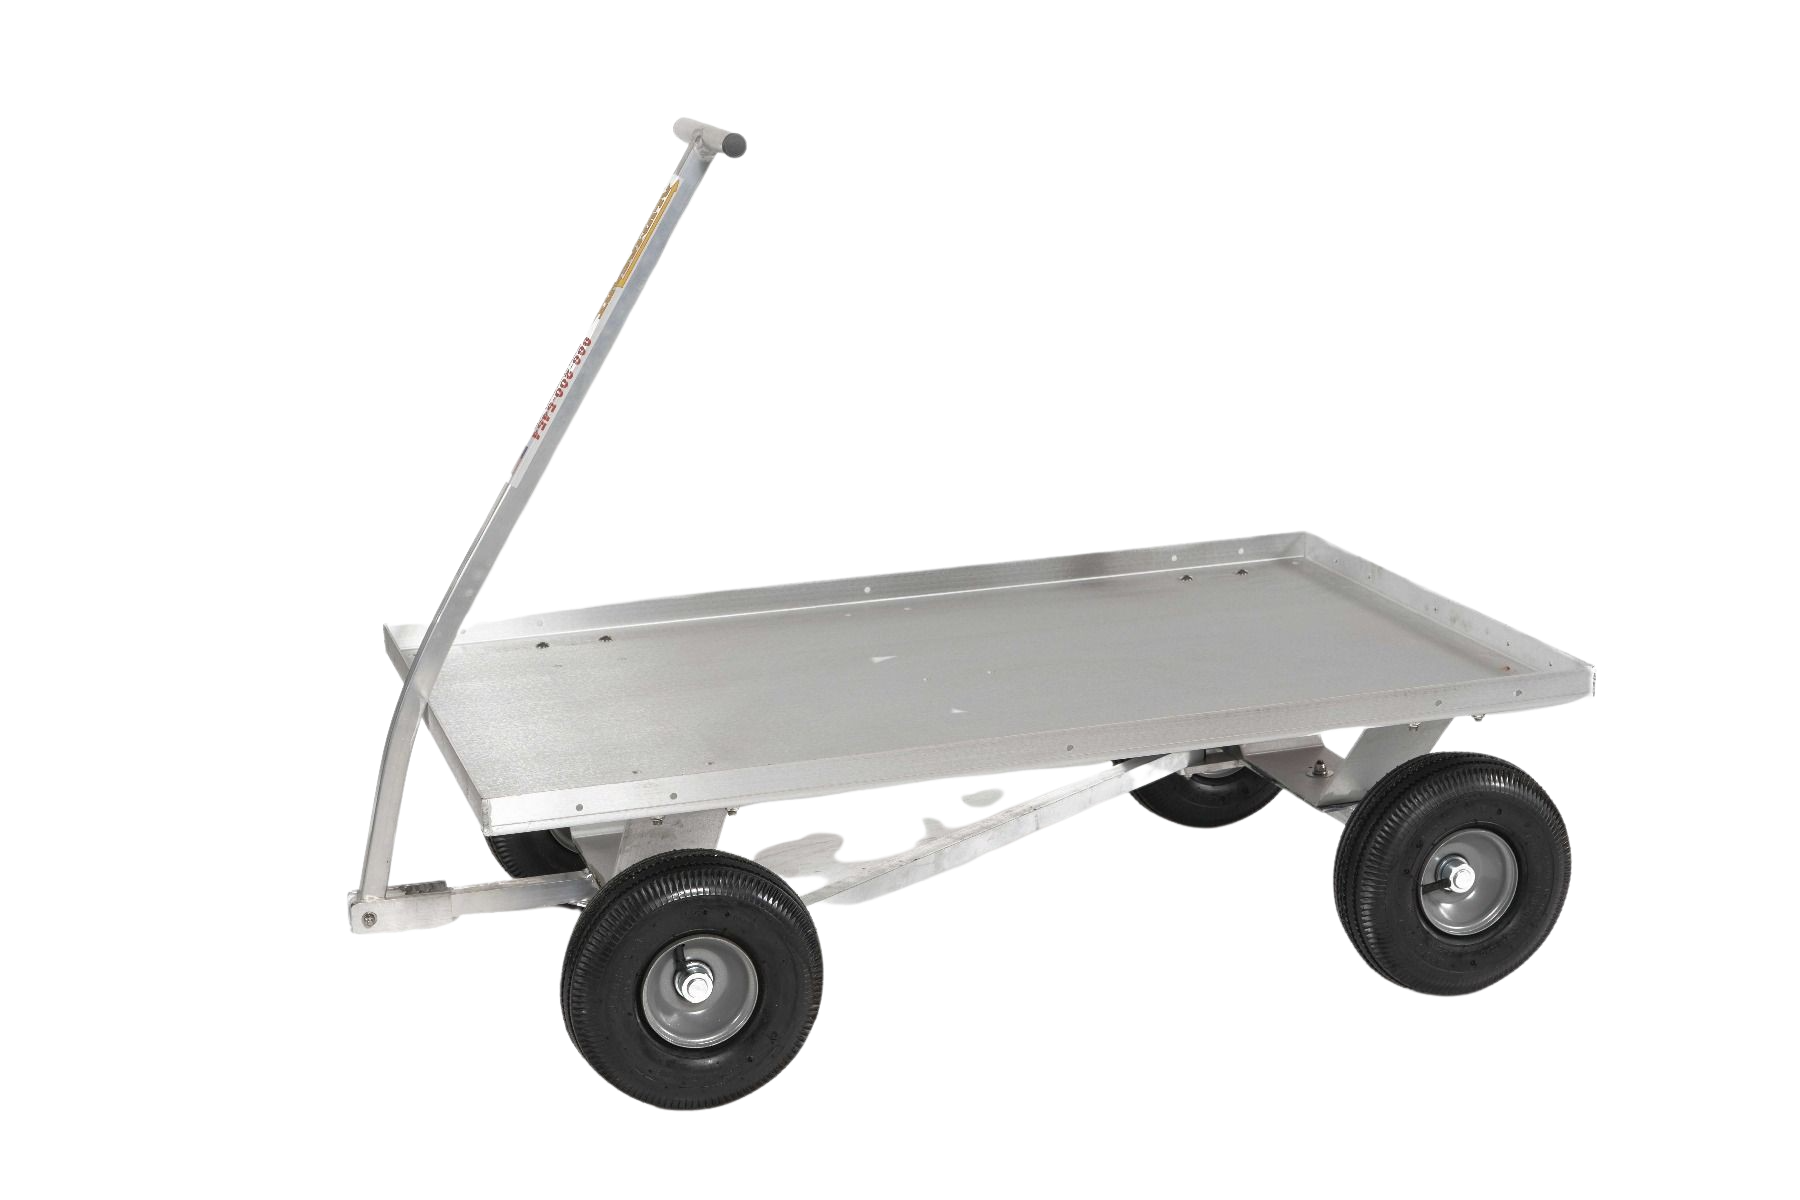 Alumacart Articulating Wagon with QUADRI-Steer Technology 45 Inch 800 Pound Capacity New